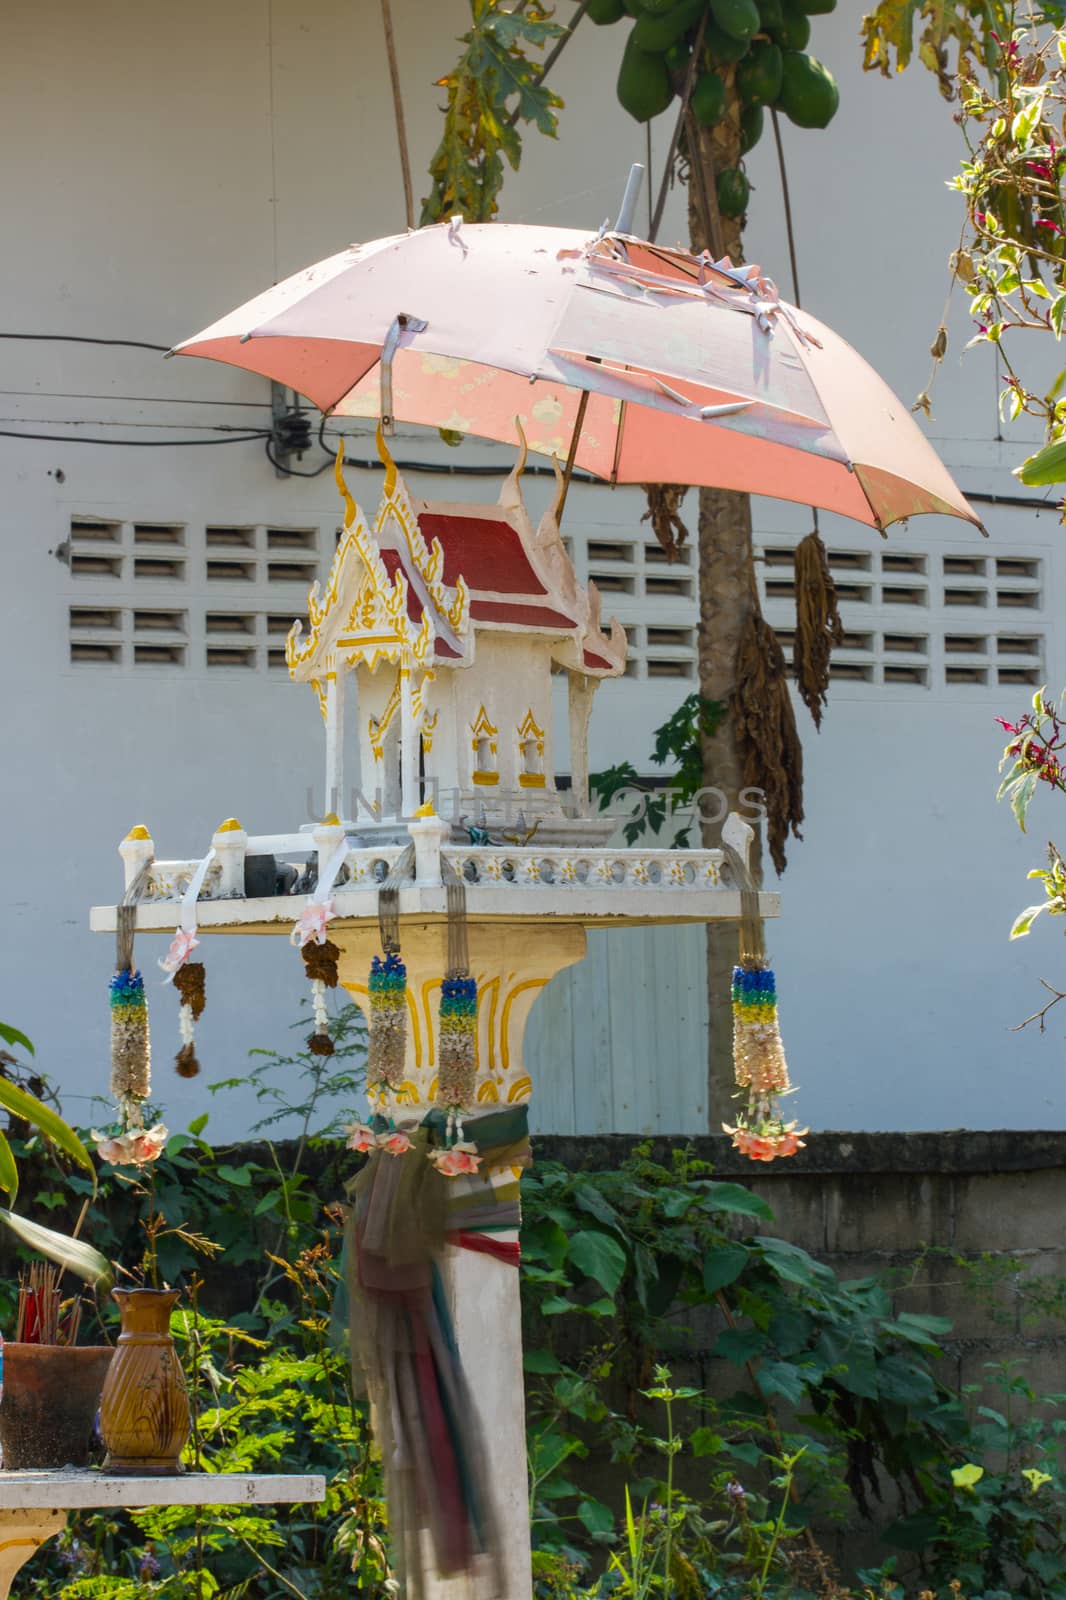 white spirit house in thailand with old umbrella over it by a3701027